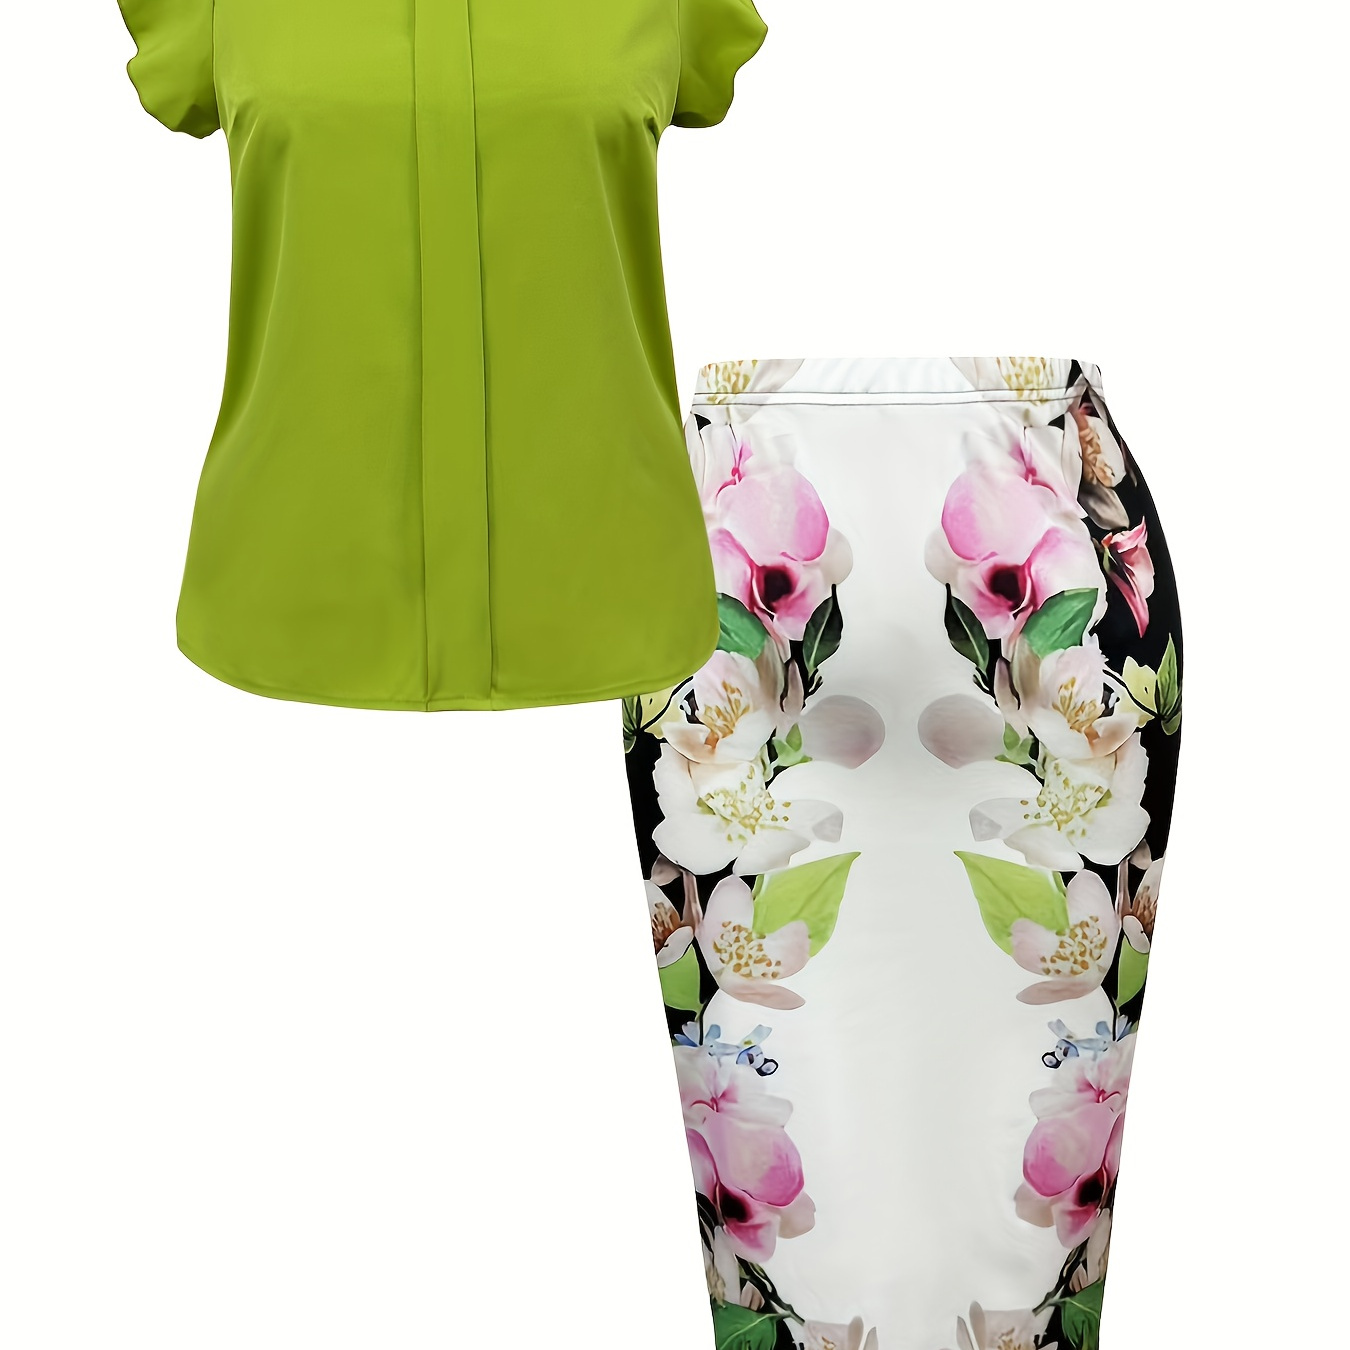 

Plus Size Floral Print Two-piece Set, Crew Neck Ruffle Sleeve Top & Bodycon Skirt Outfits, Women's Plus Size clothing